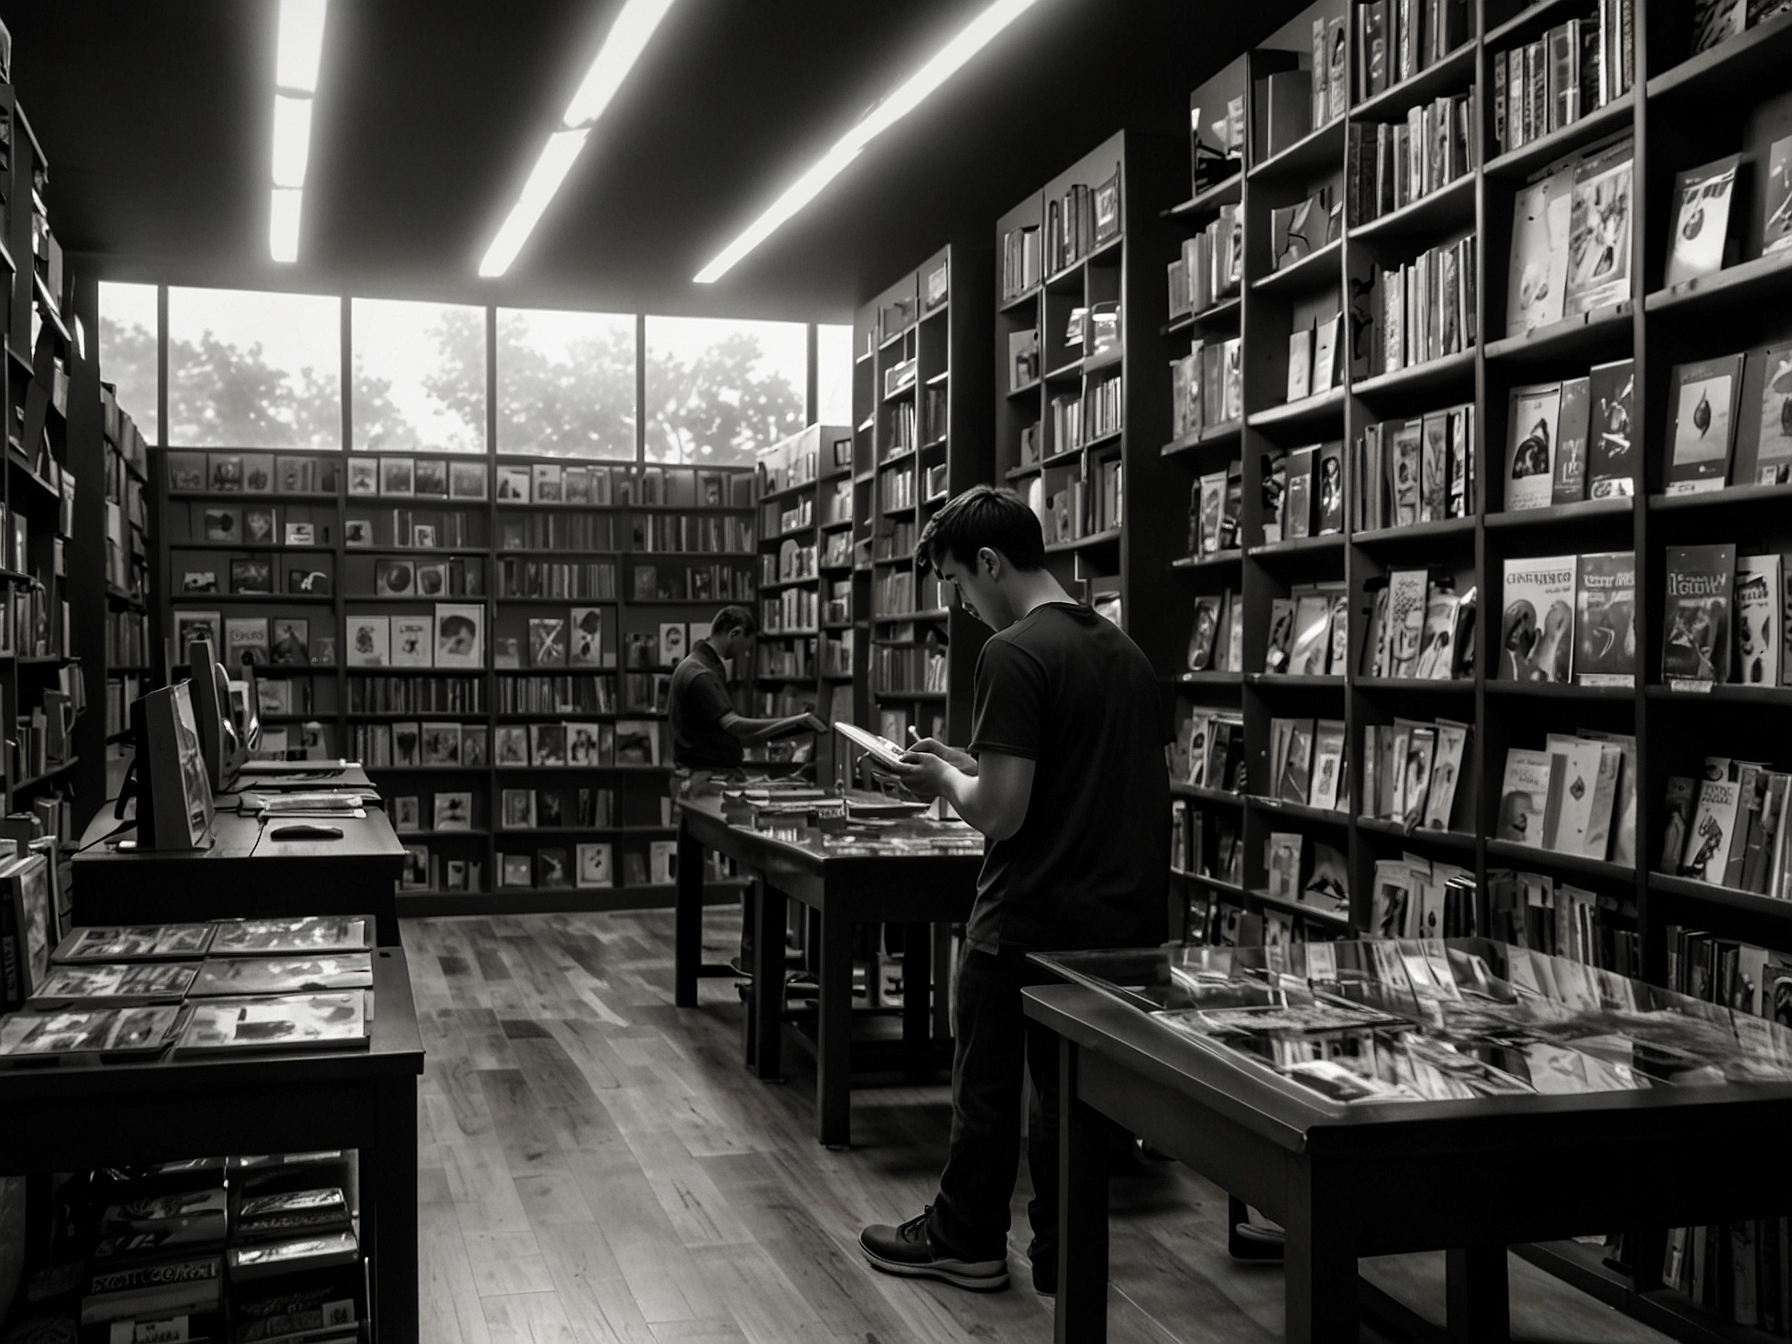 A photograph of a gamer browsing through physical game copies at a GAME store, emphasizing the tangible benefits and collectible nature of boxed editions.